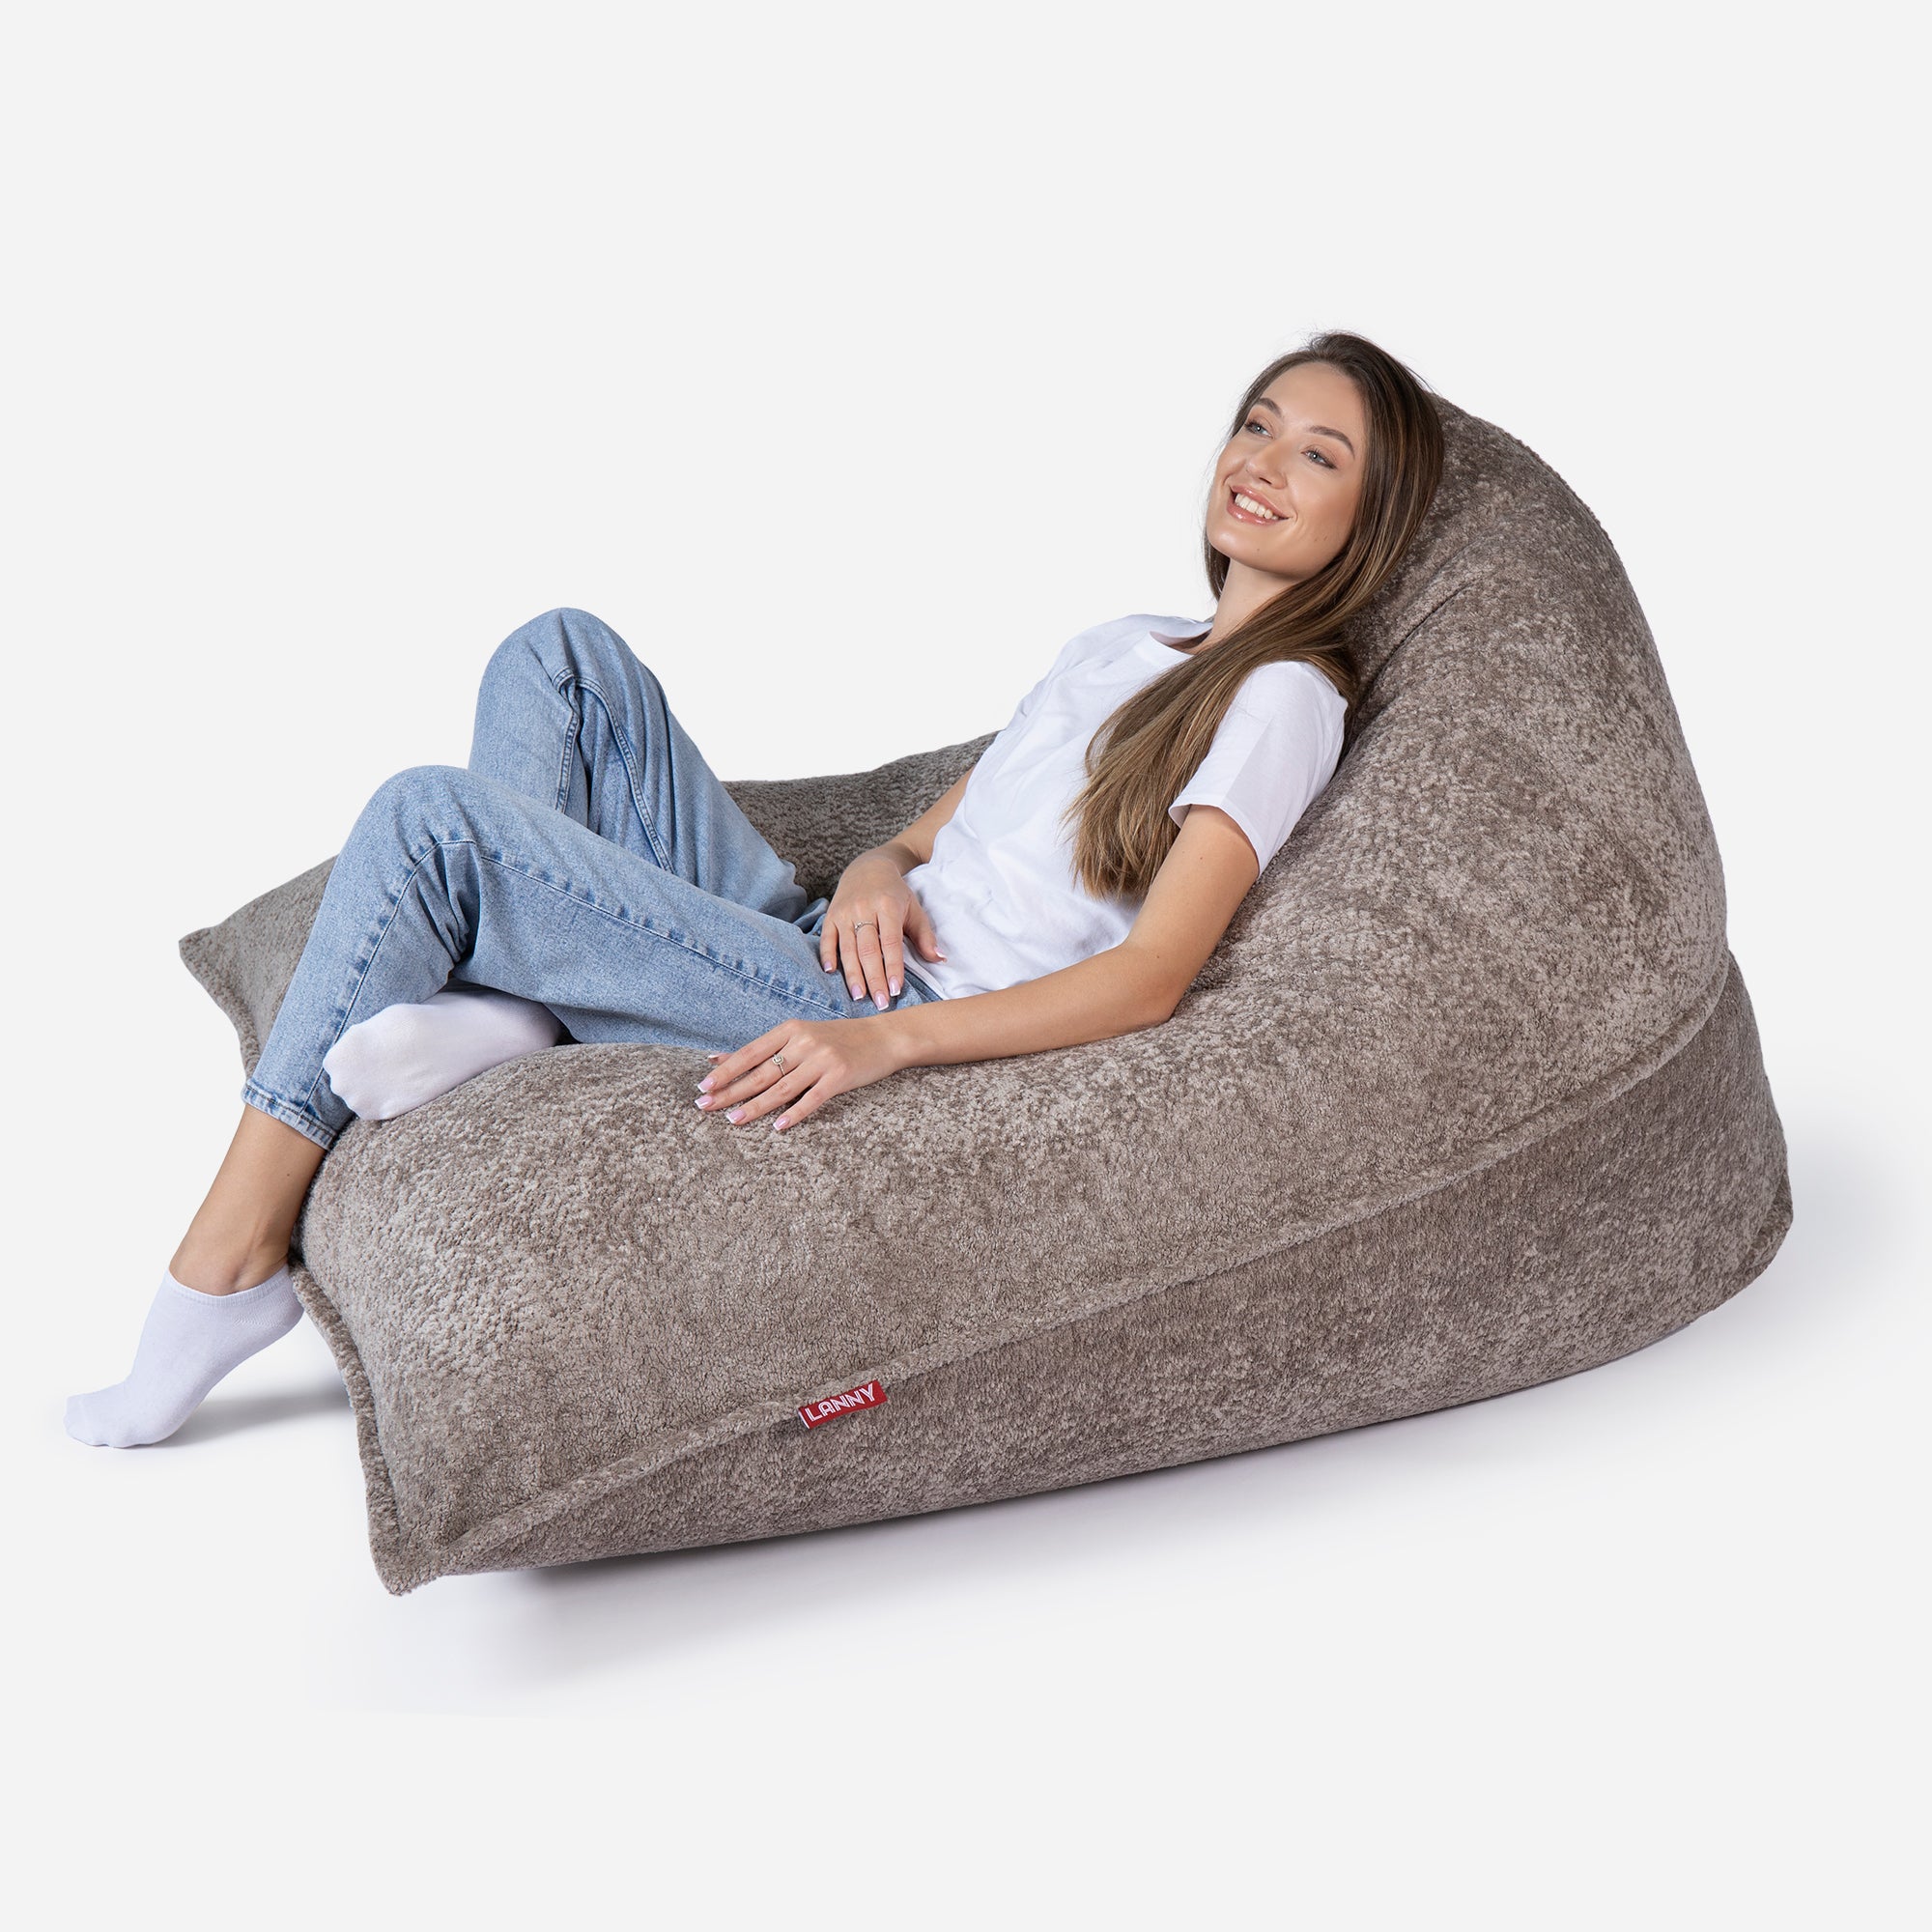 Beanbag Sloppy design fluffy fabric brown color  with girl seating on it 